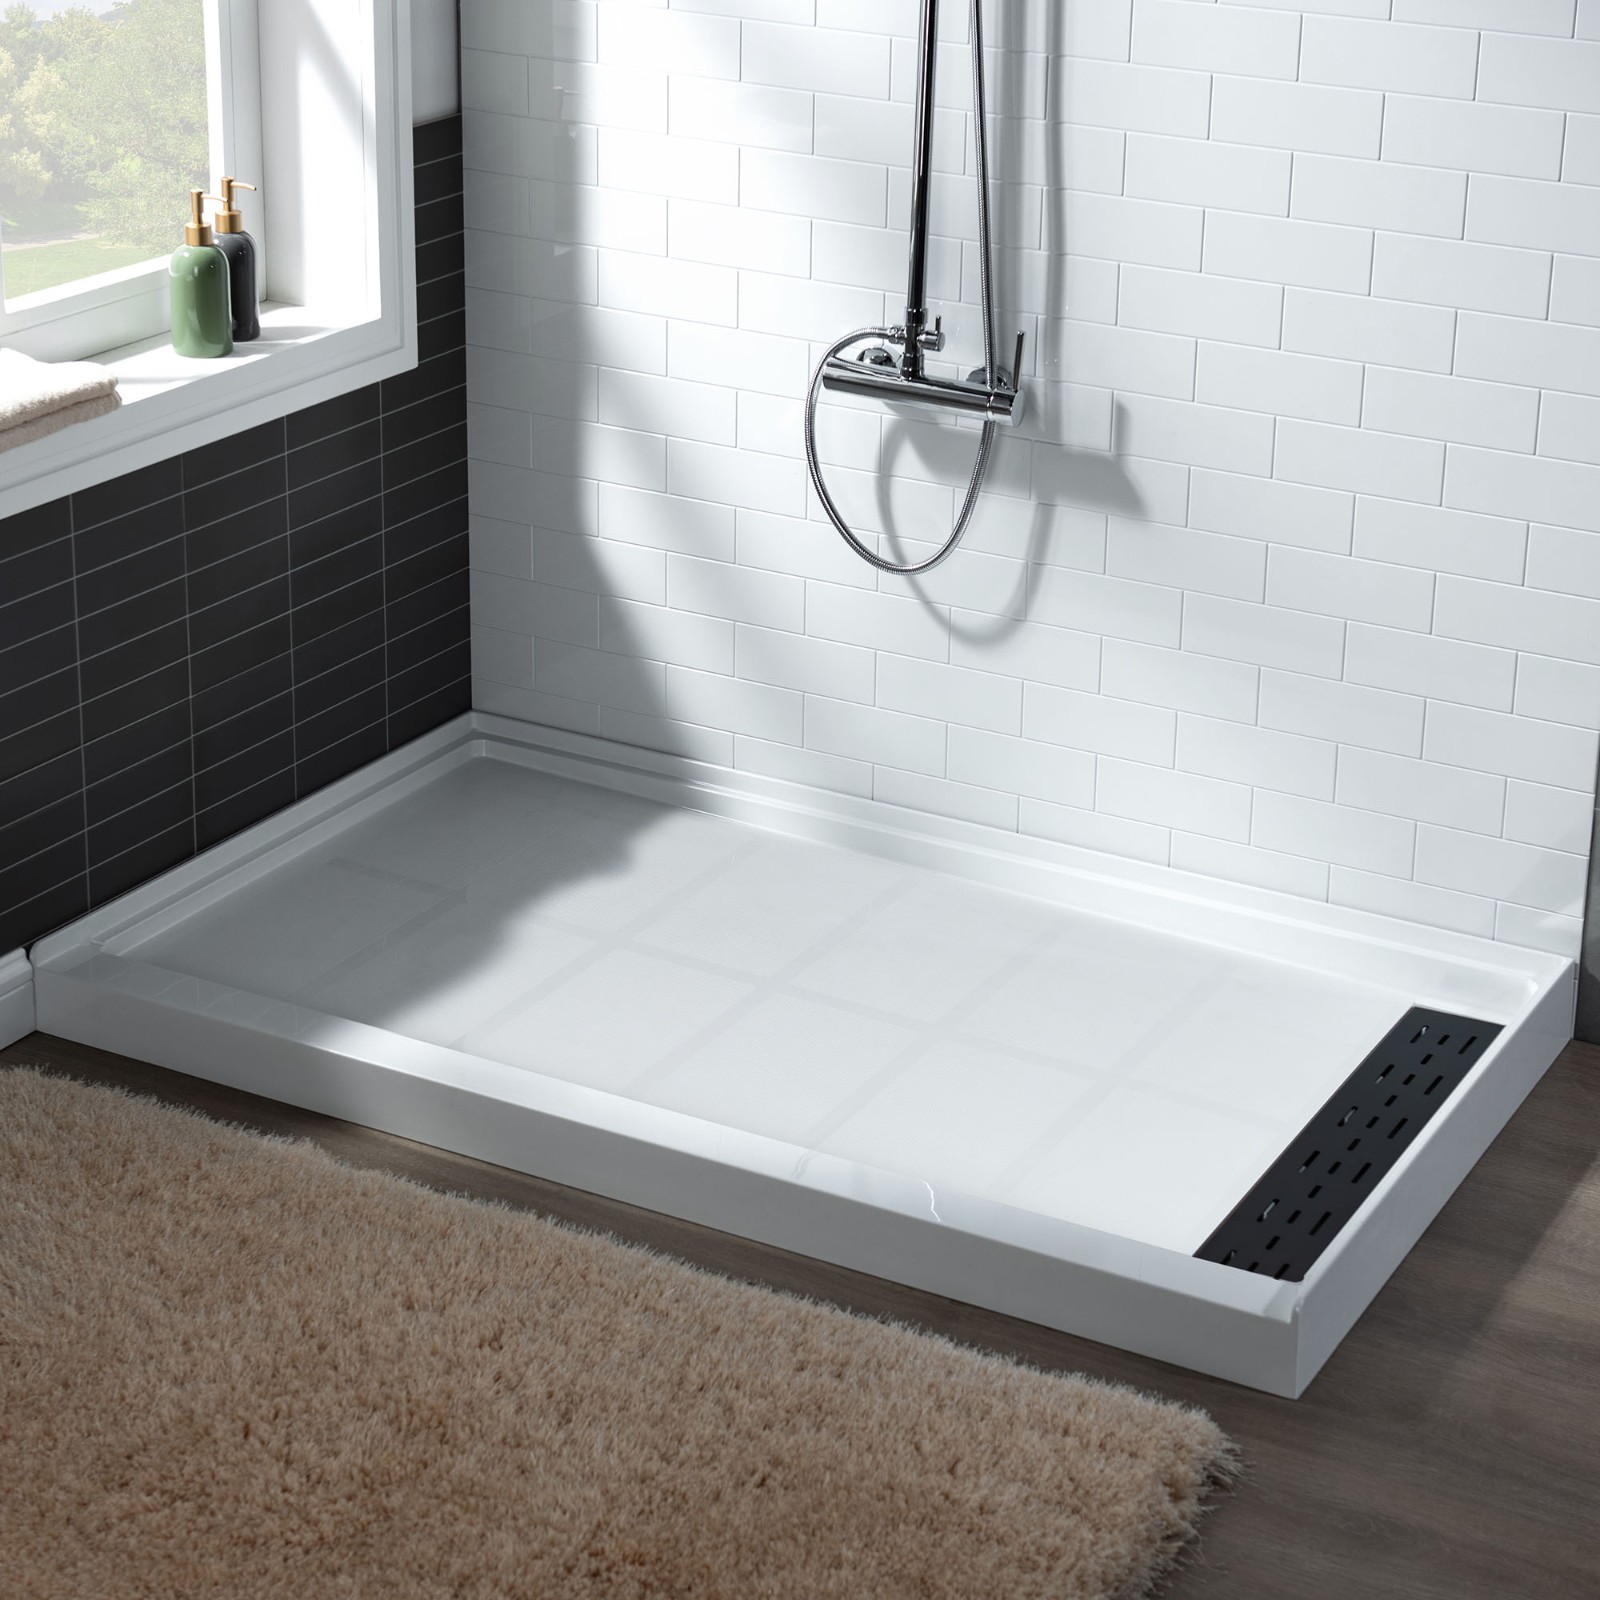  WOODBRIDGE SBR4836-1000R-MB SolidSurface Shower Base with Recessed Trench Side Including Matte Black Linear Cover, 48